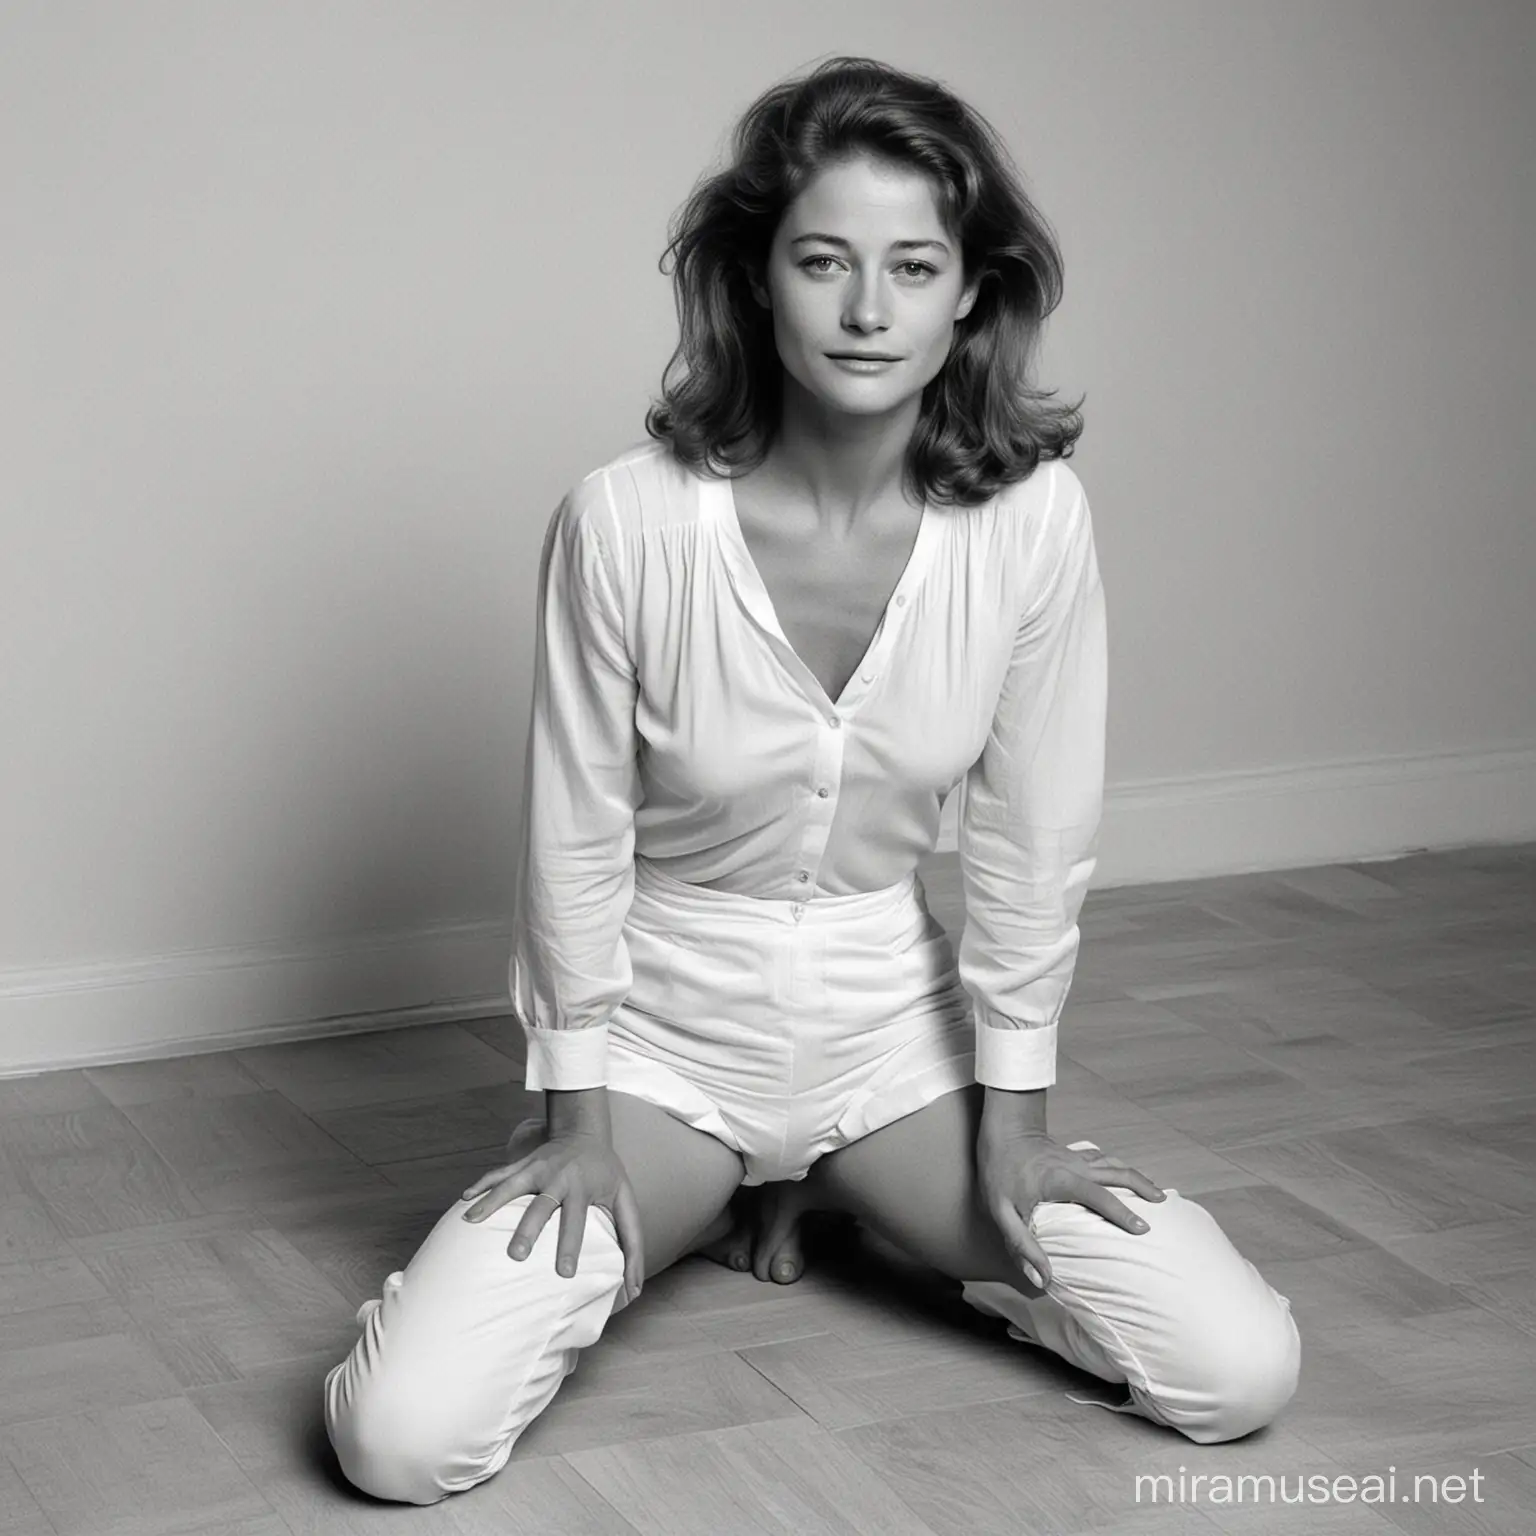 Young Charlotte Rampling posing on her knees, knees spread wide.